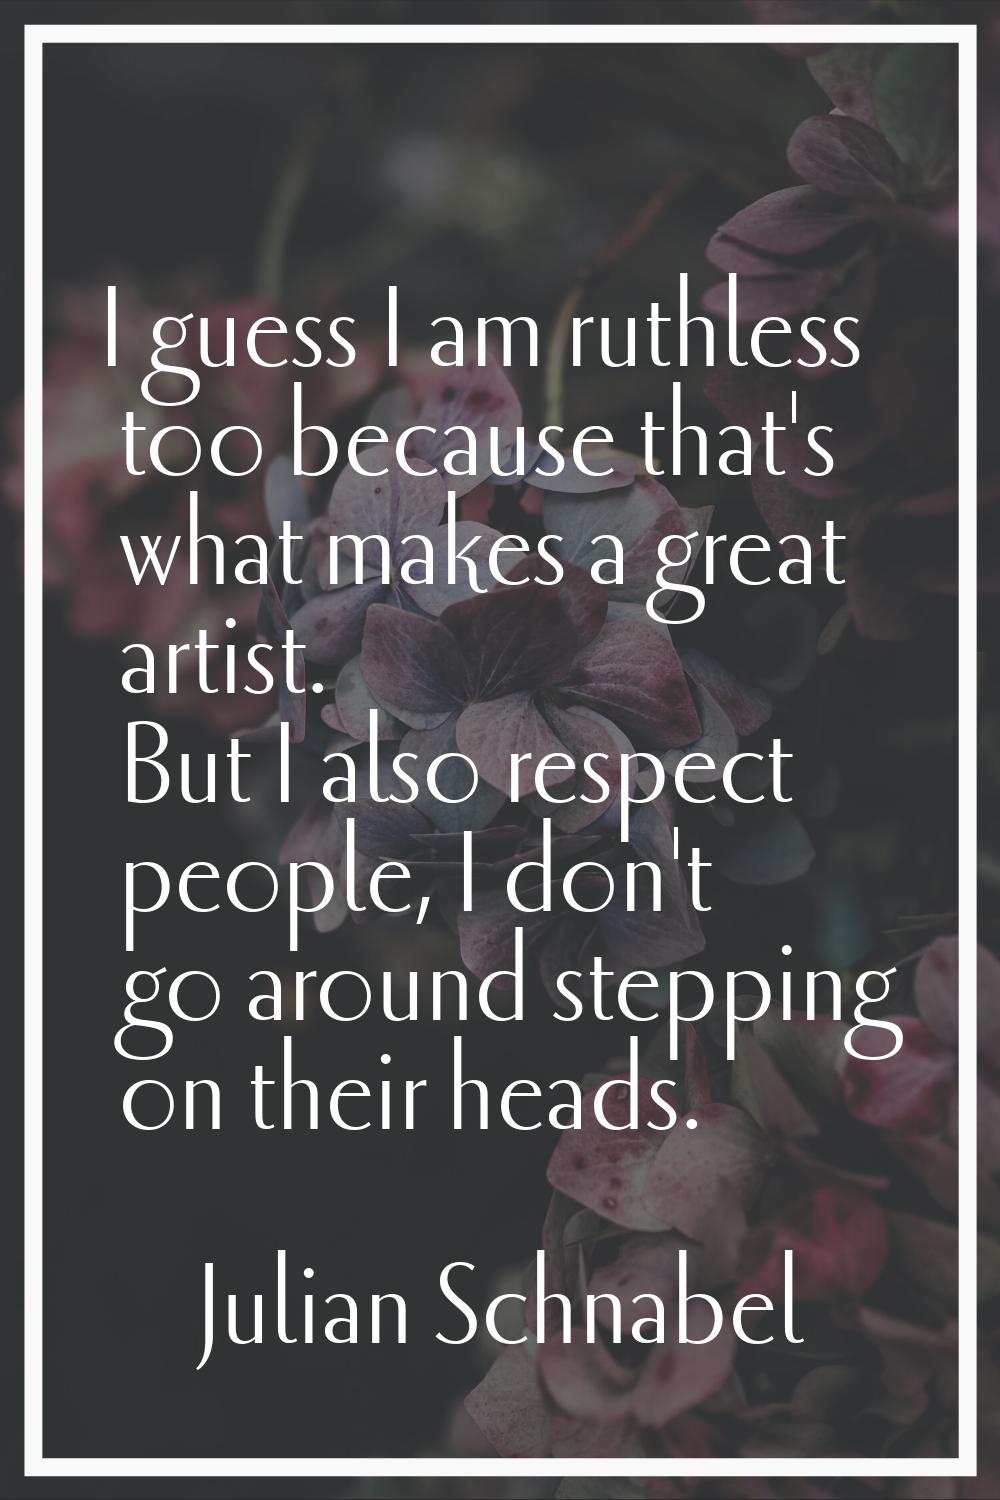 I guess I am ruthless too because that's what makes a great artist. But I also respect people, I do